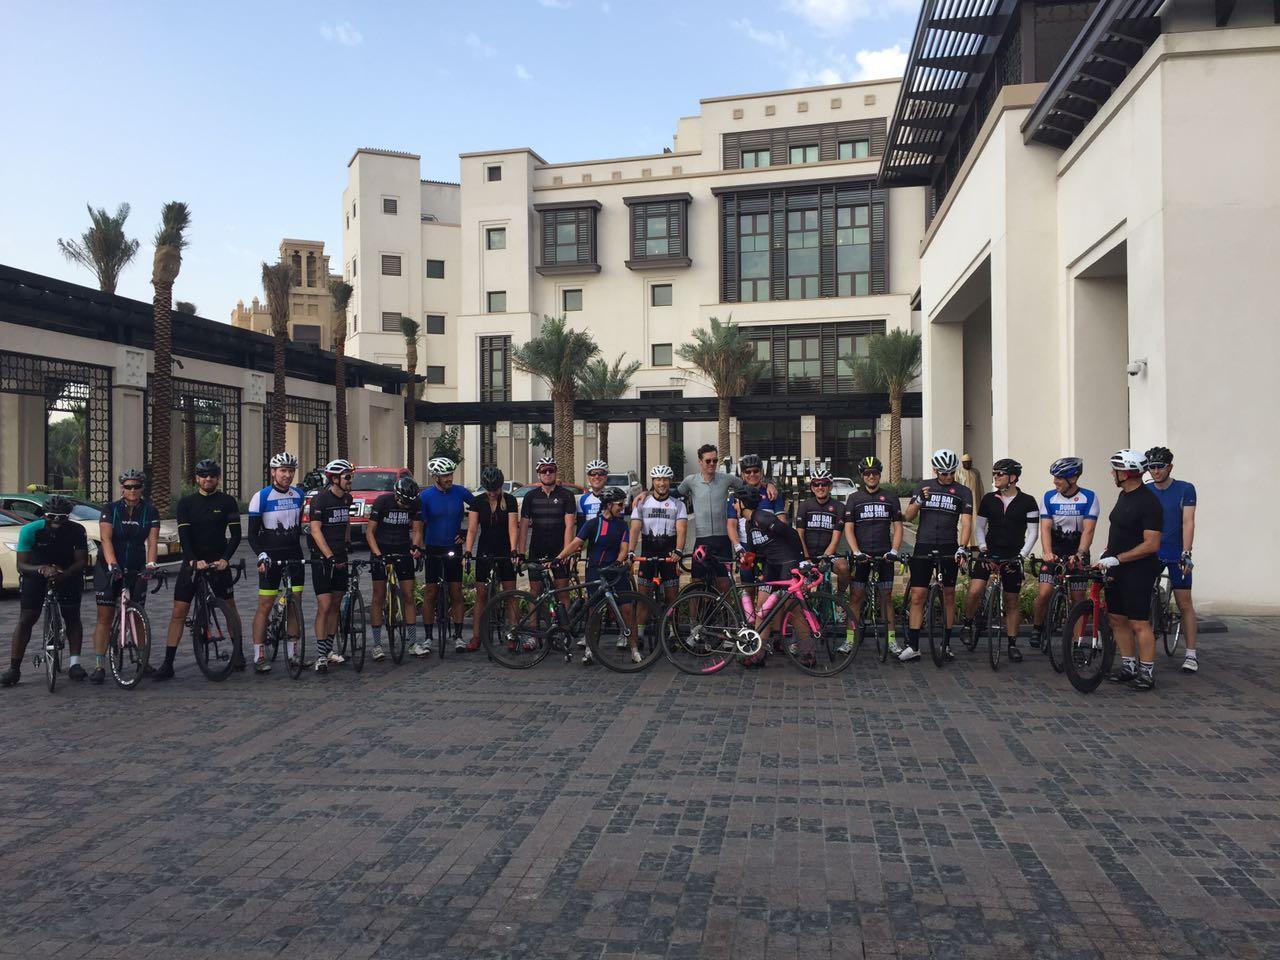 There's a readymade cycling community in Dubai - join the Dubai Roadsters, seen here with David Millar